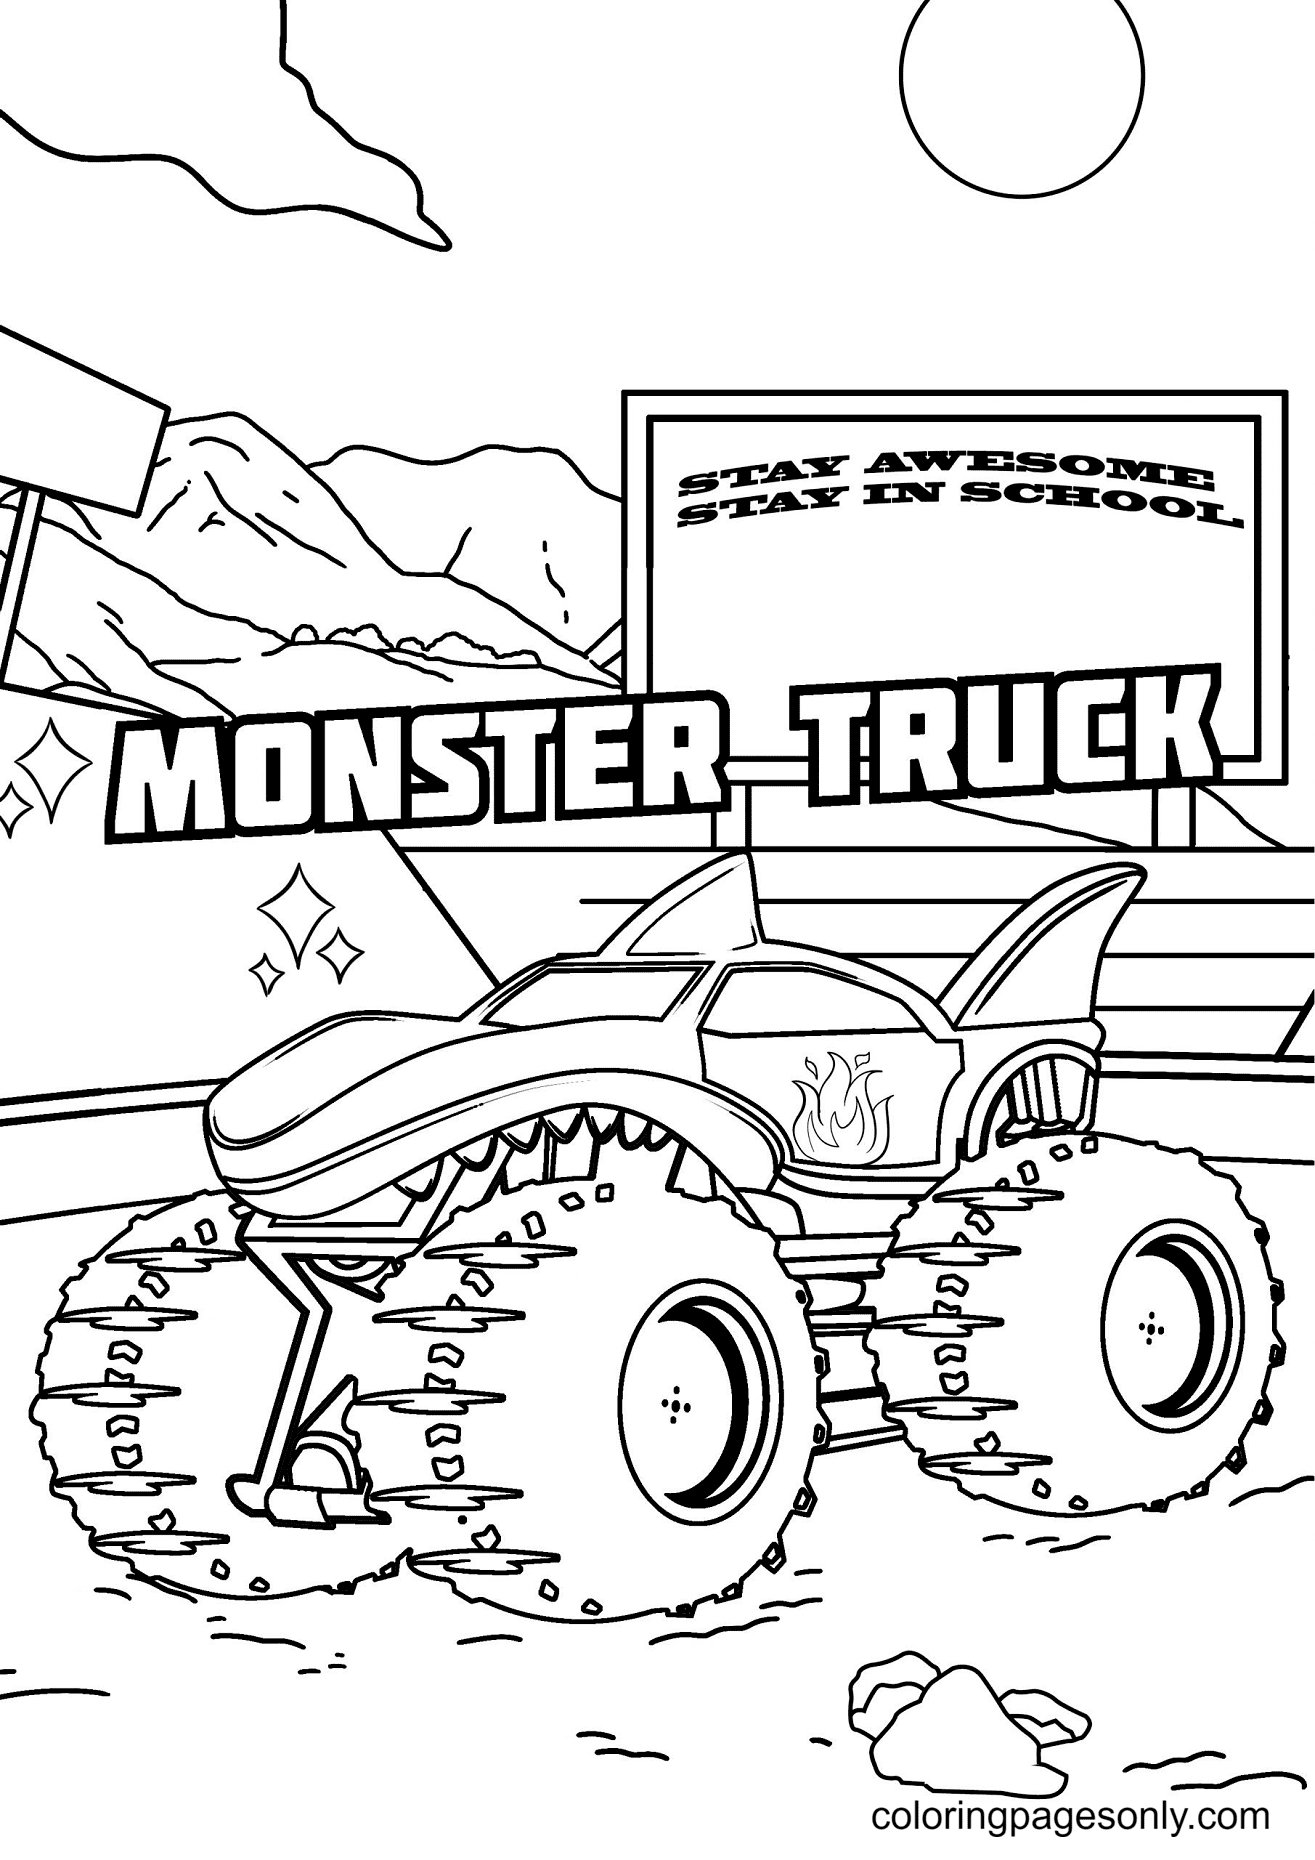 Printable Free Monster Truck Coloring Pages